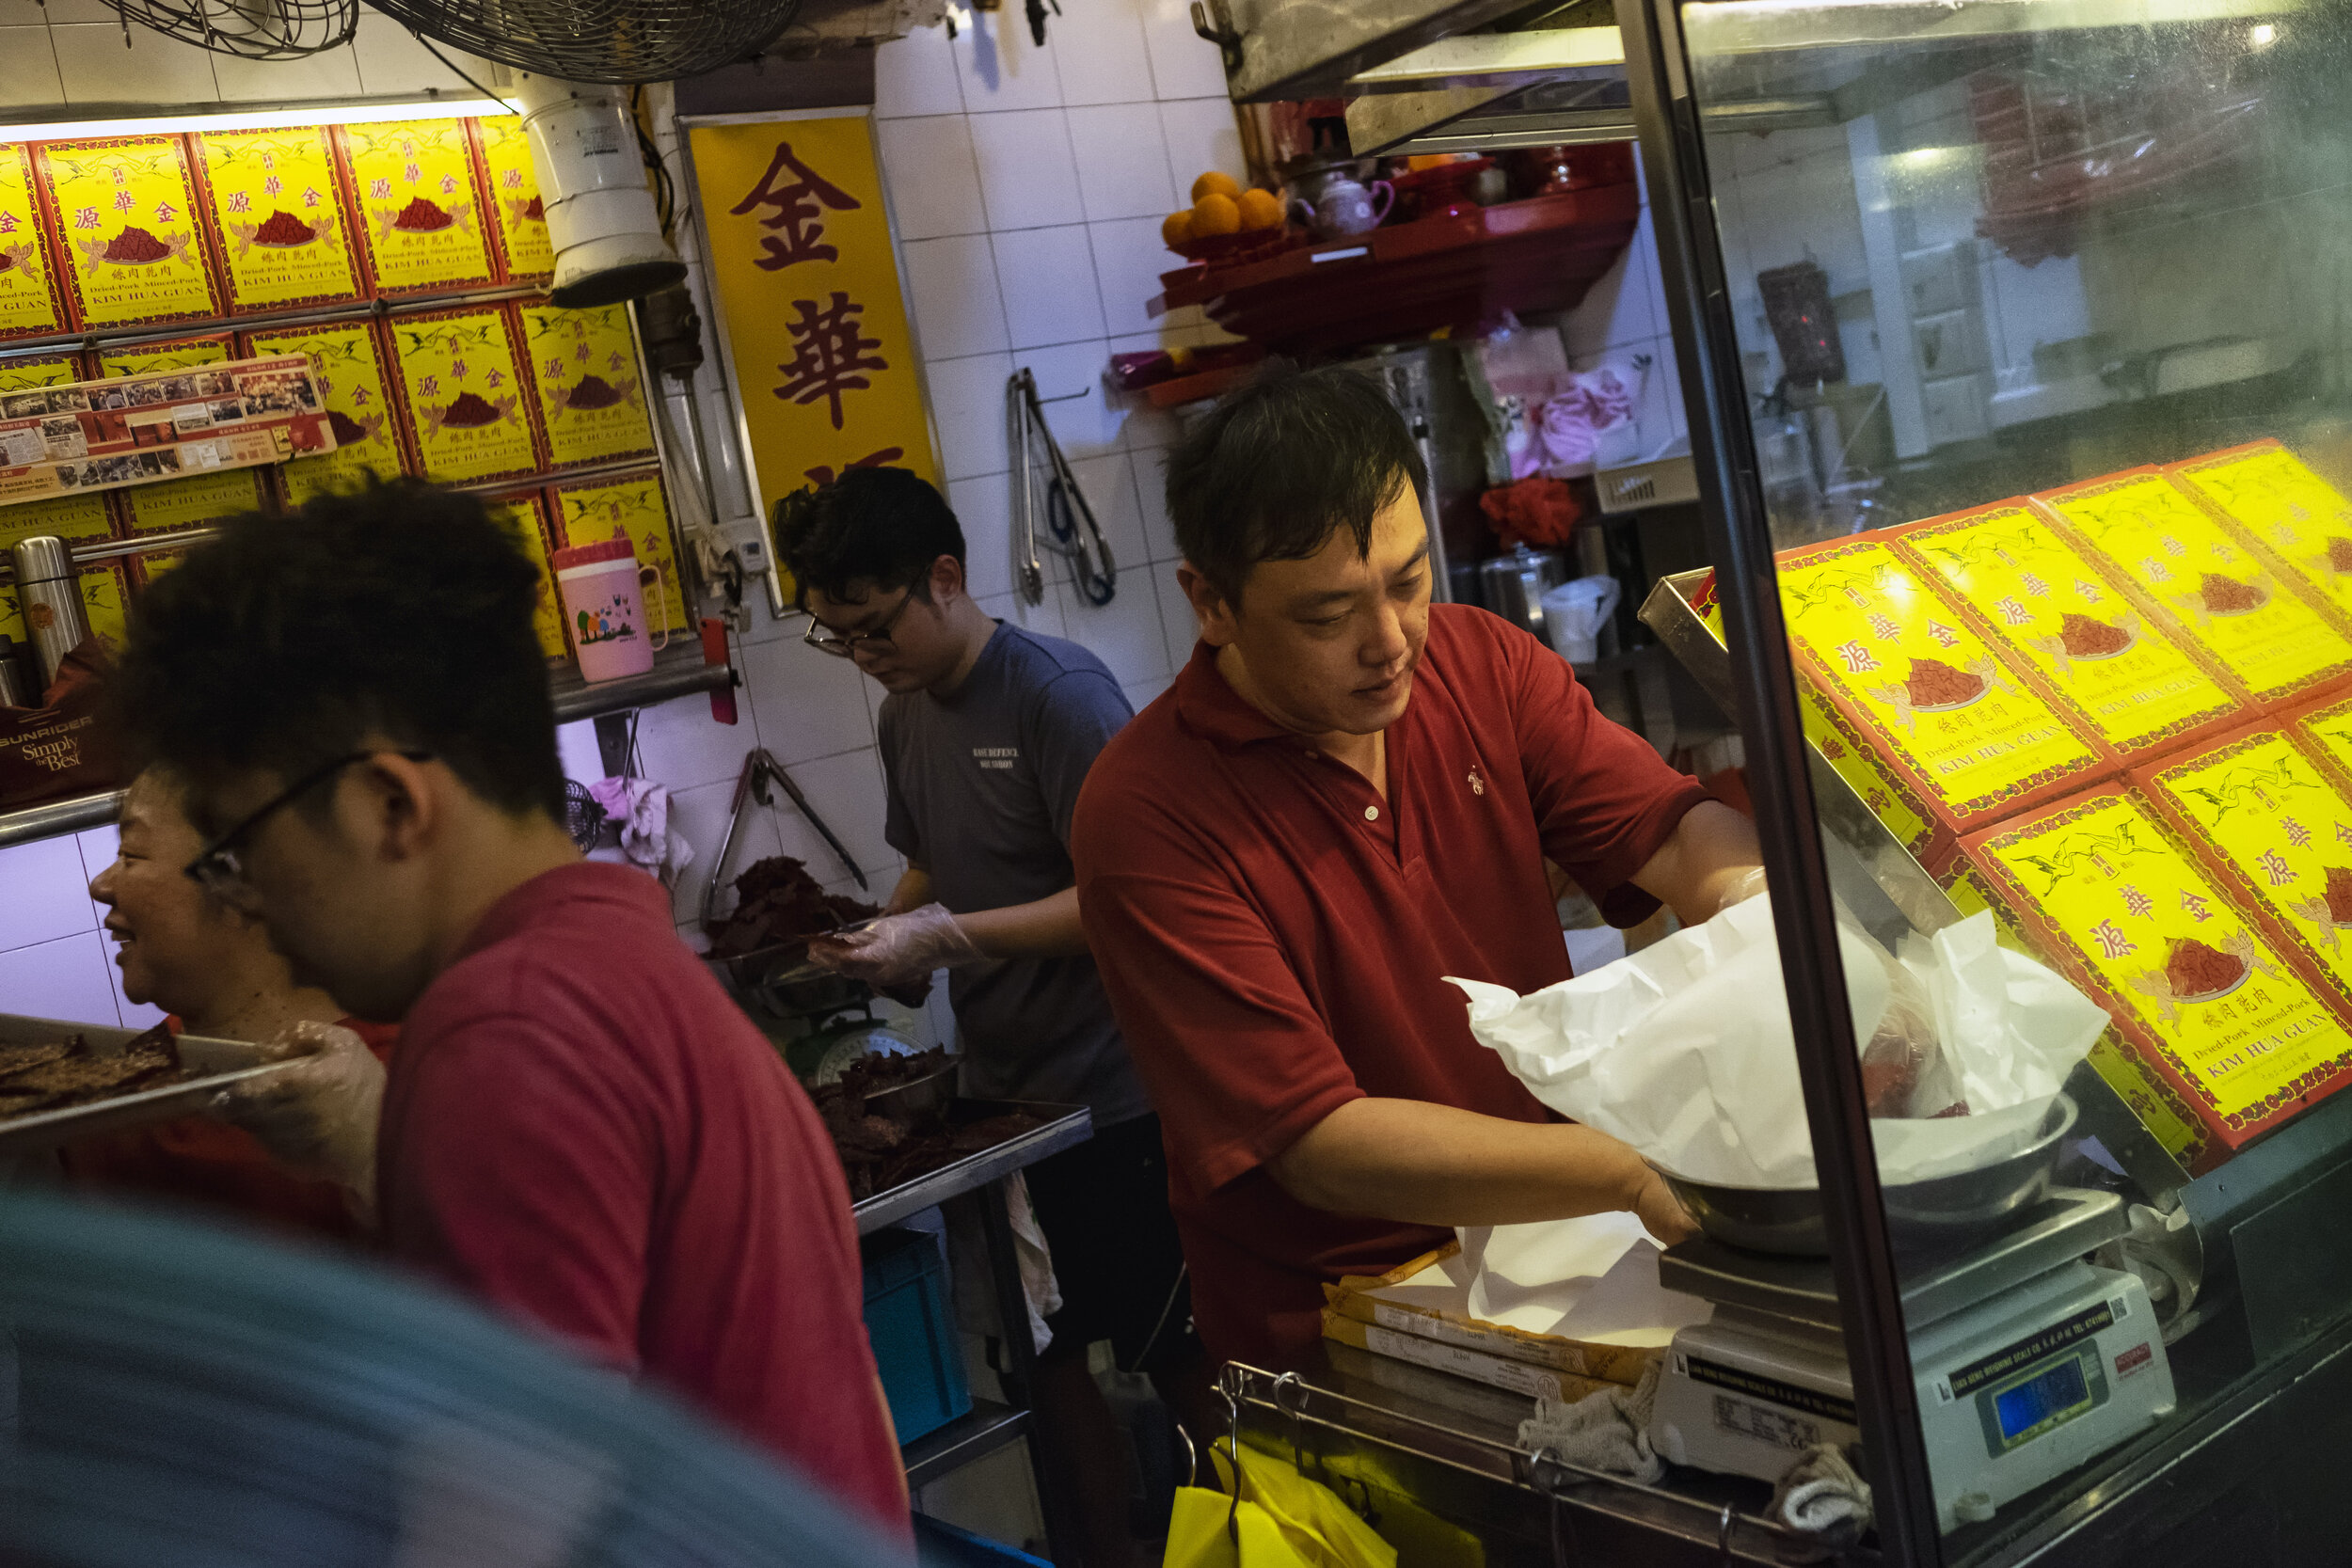  Second generation owner Ng Thian Beng, whose father founded Bak Kwa maker Kim Hua Guan in 1969, works alongside his staff to fulfill pre-orders in the confines of the stall  